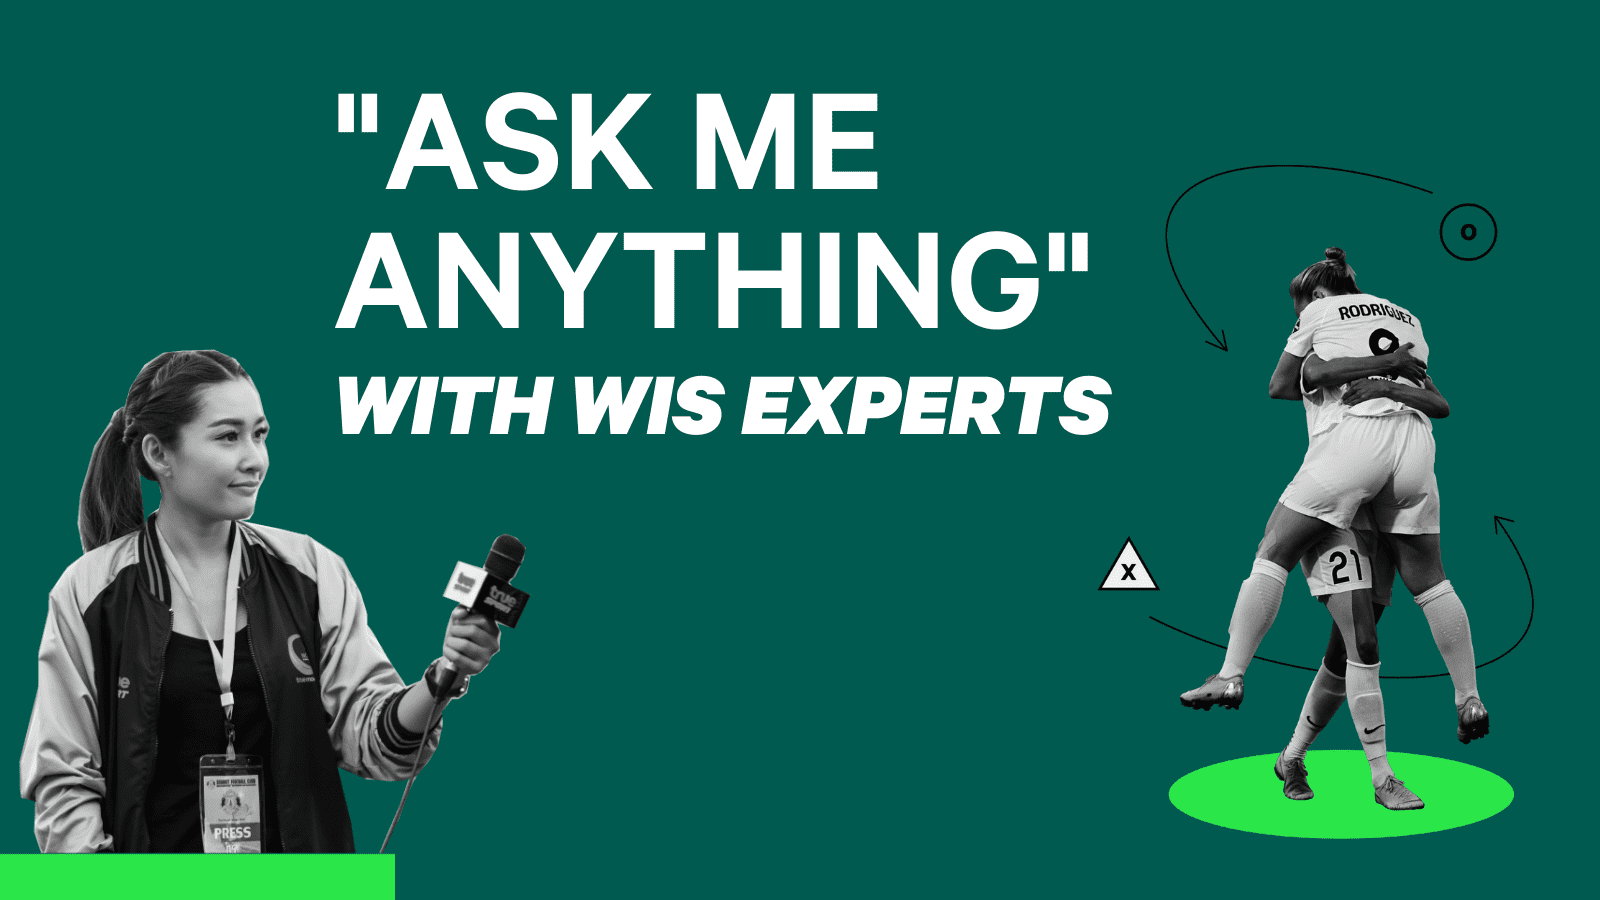 “ASK ME ANYTHING” WITH WIS EXPERTS